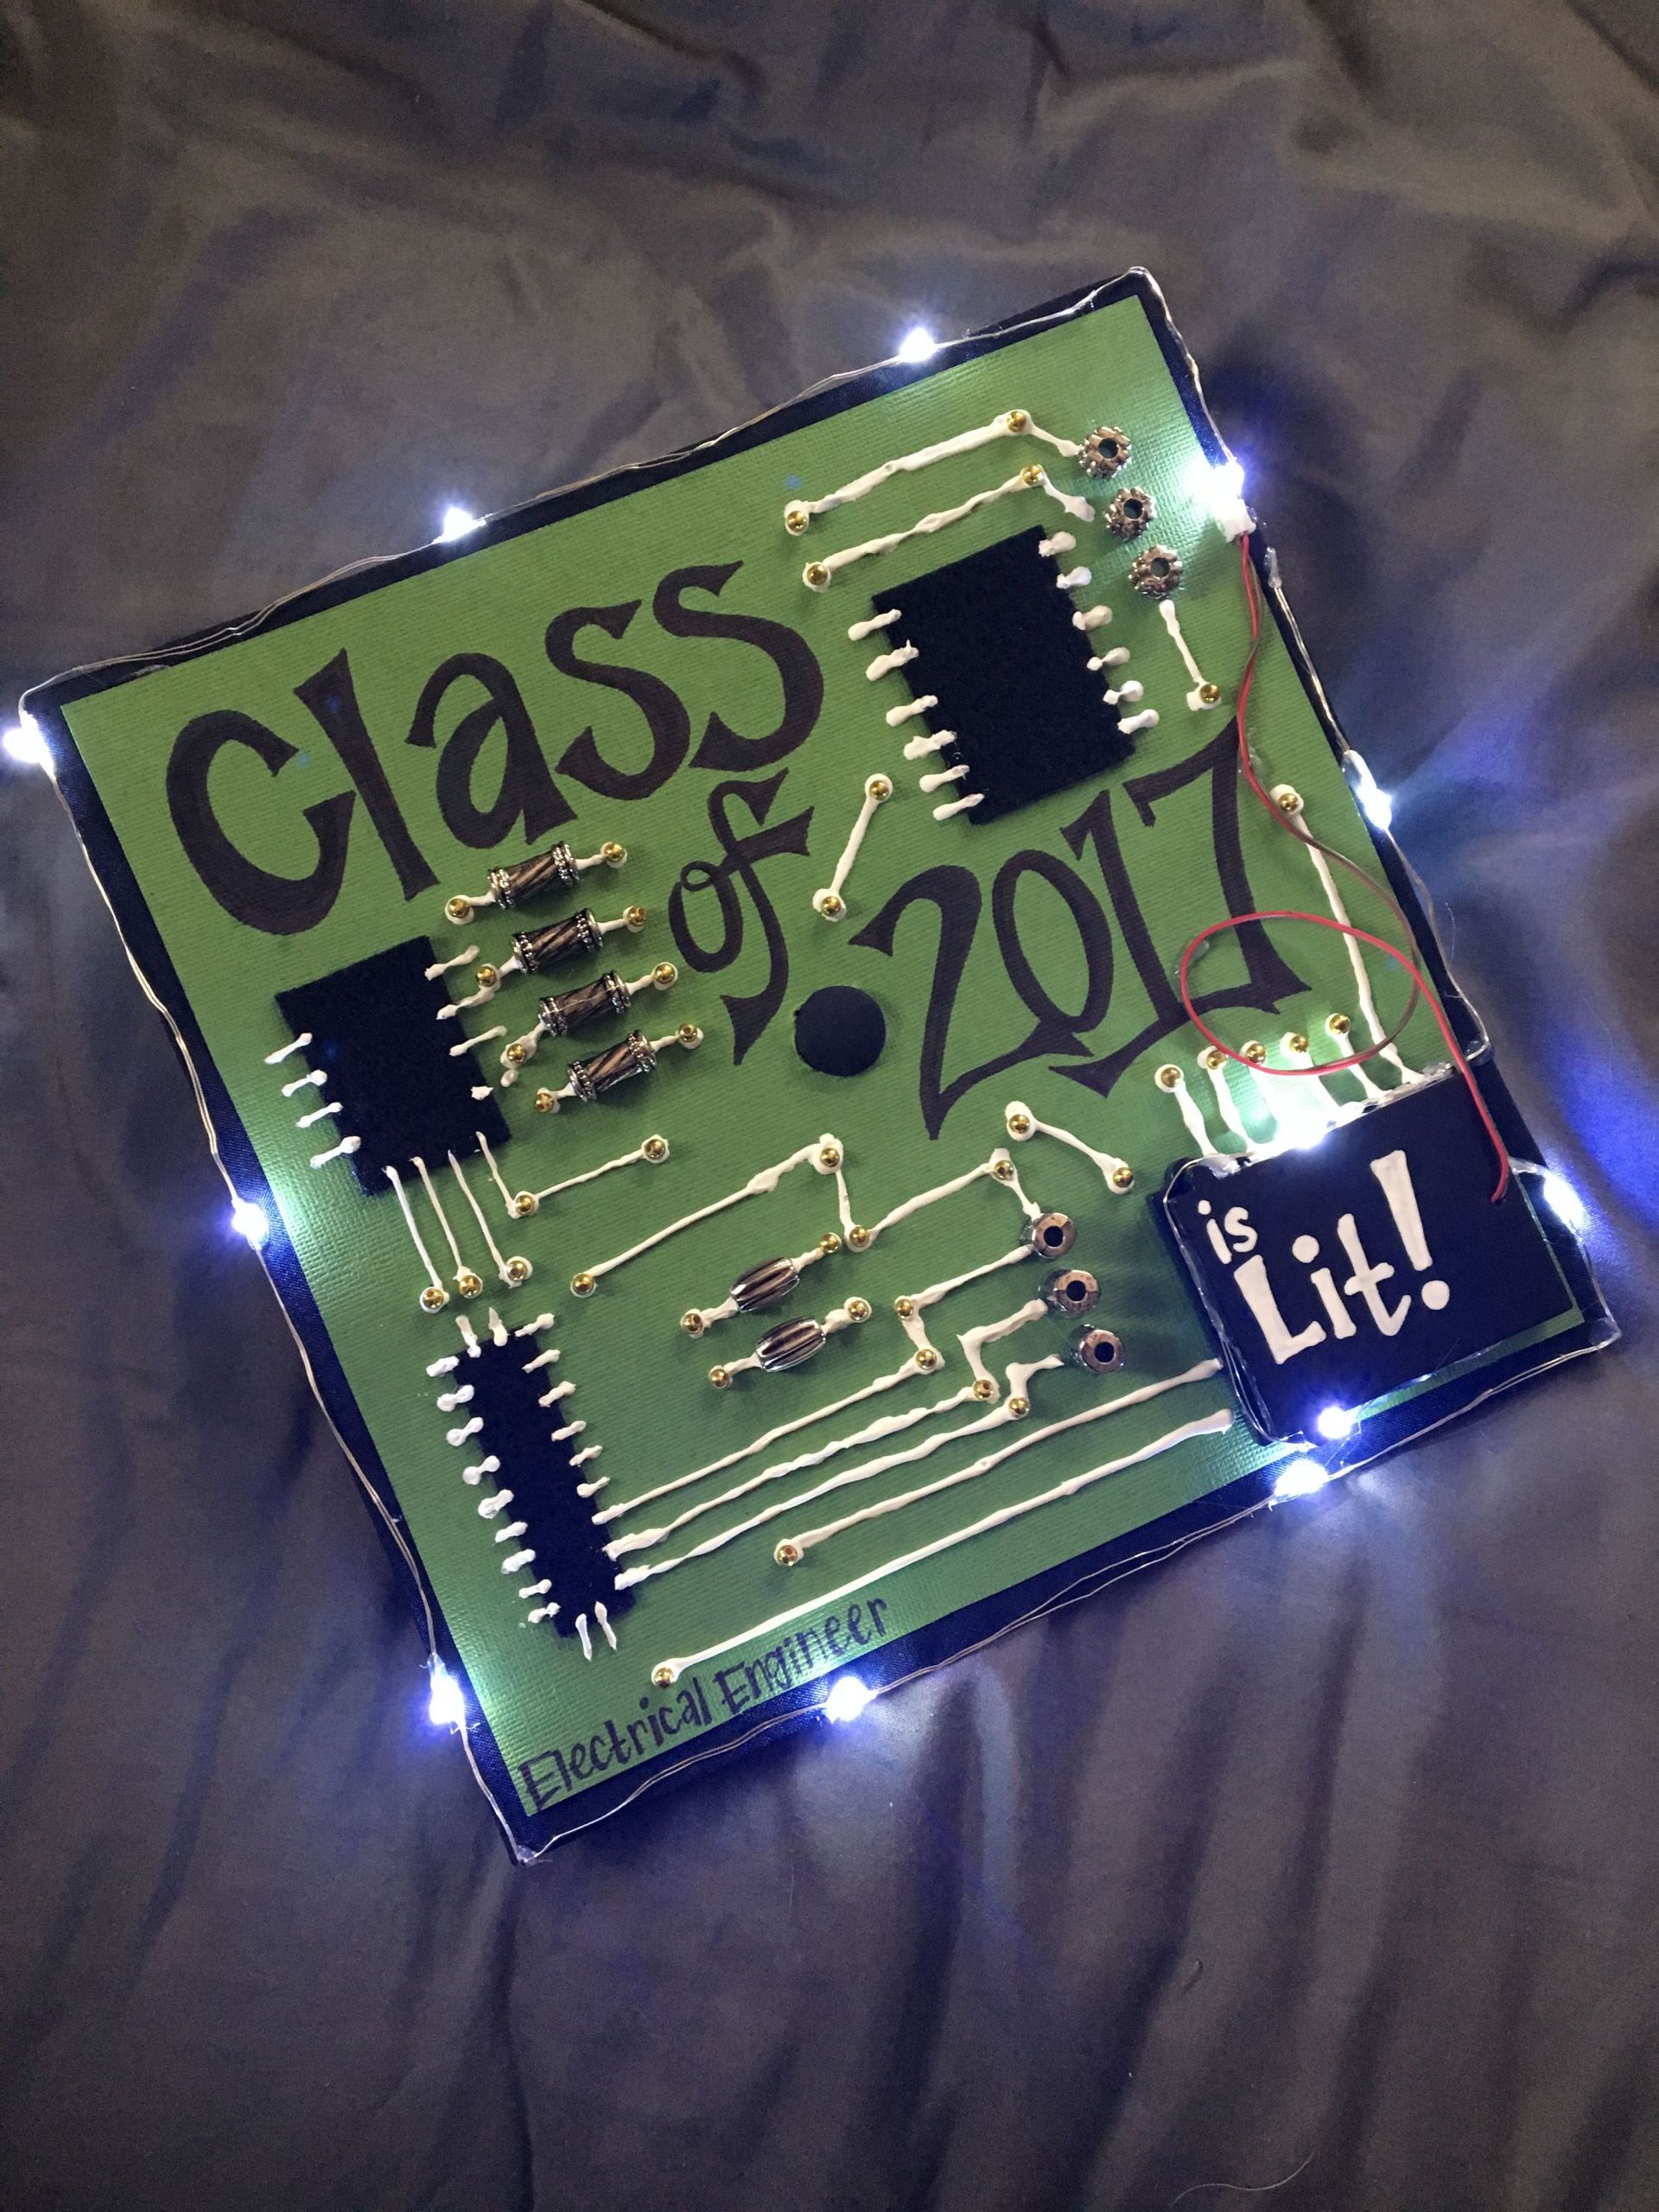 Electrical Engineering Graduation Party Ideas
 Electrical Engineer Circuit Board Cap